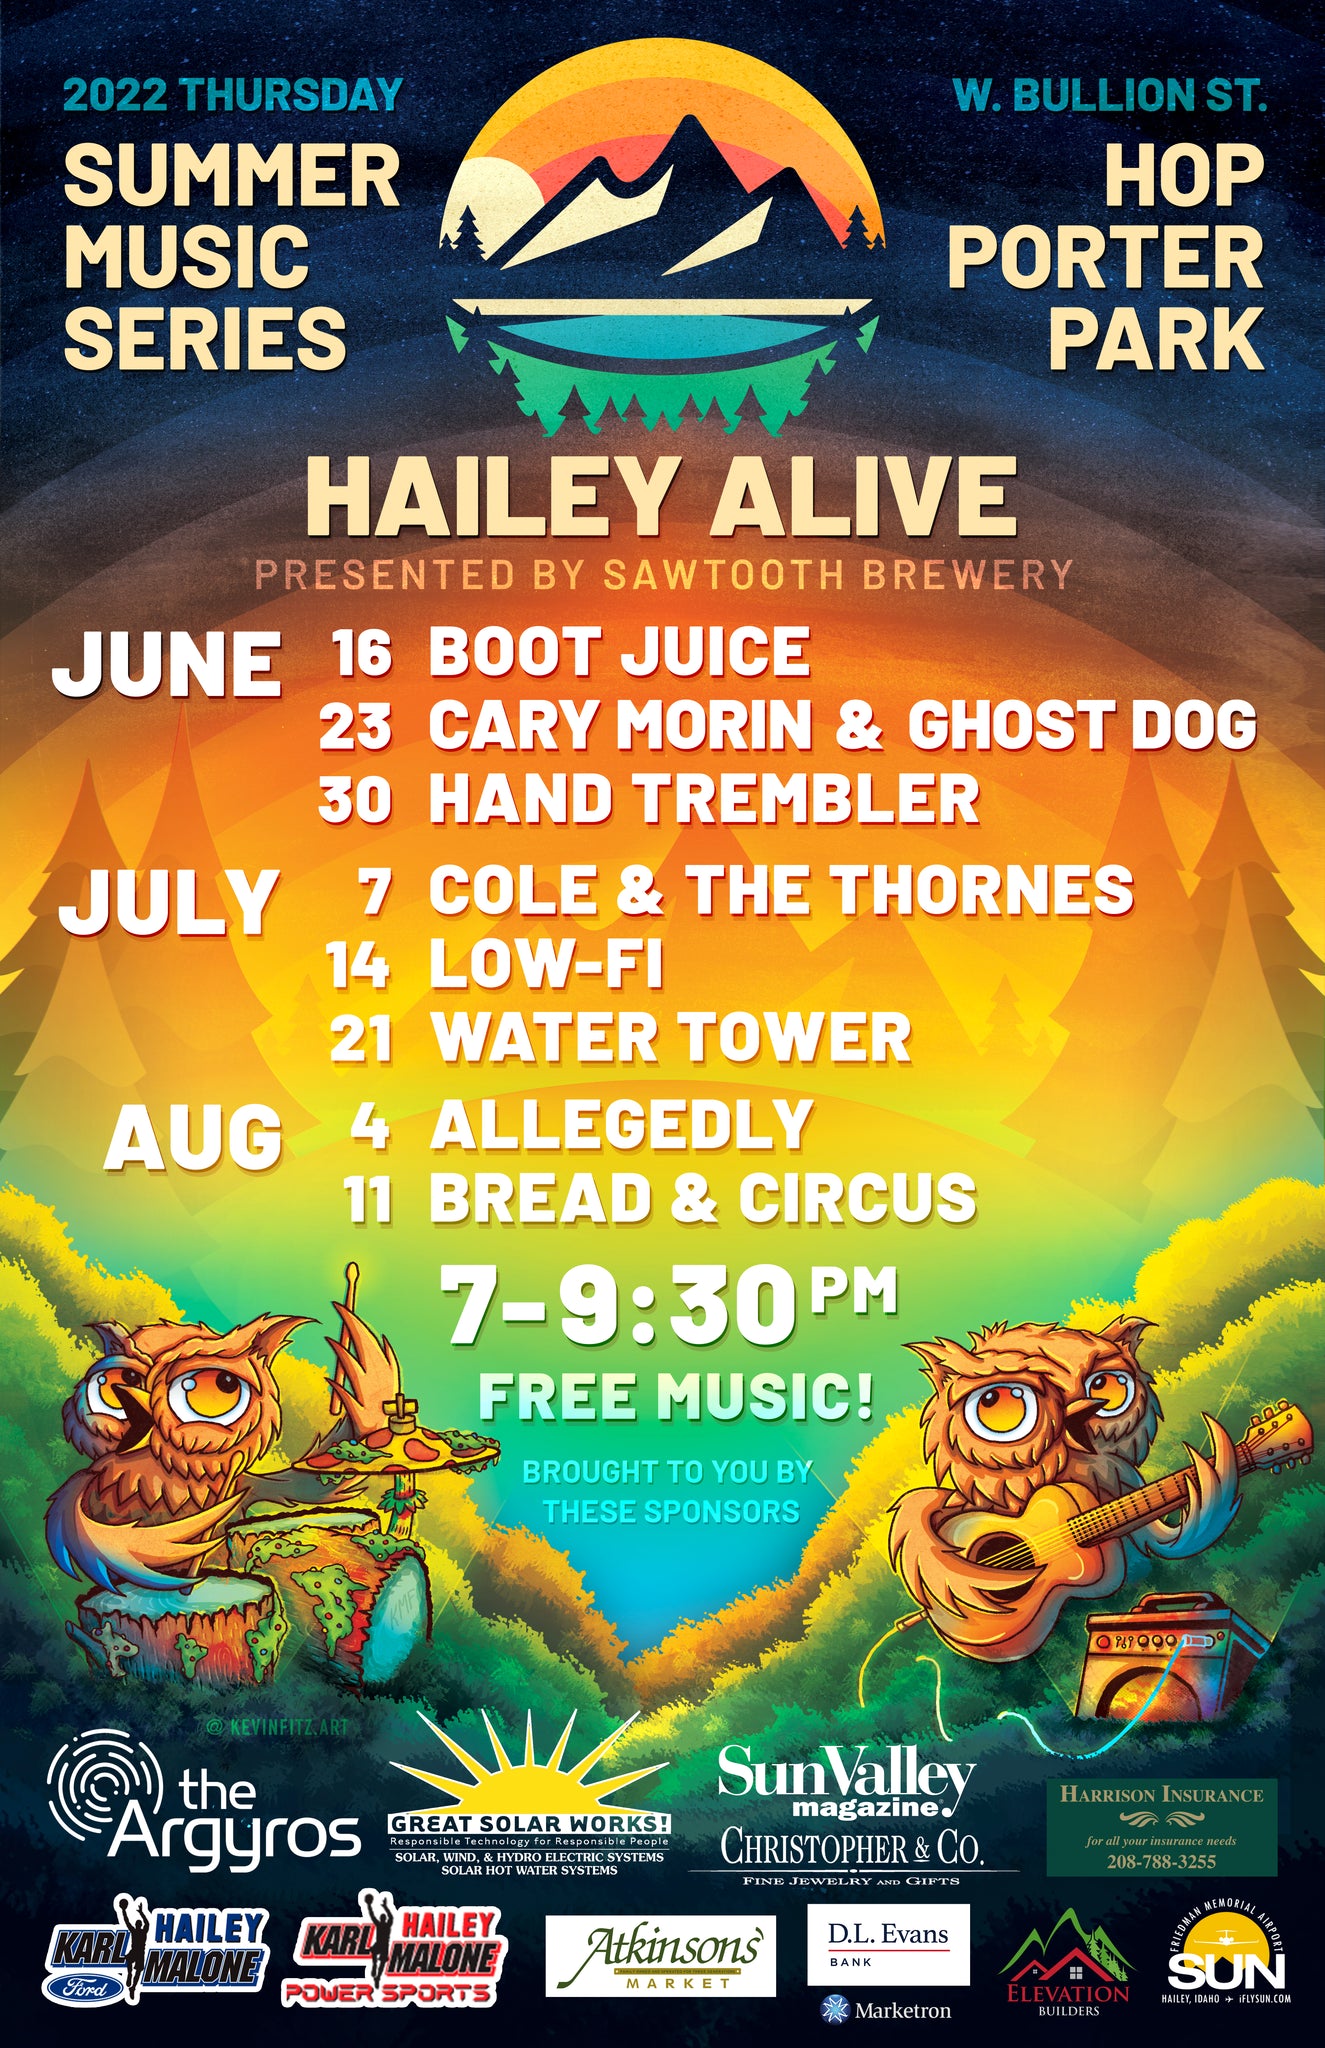 Hailey Alive by Sawtooth Brewery, Concert Poster Art